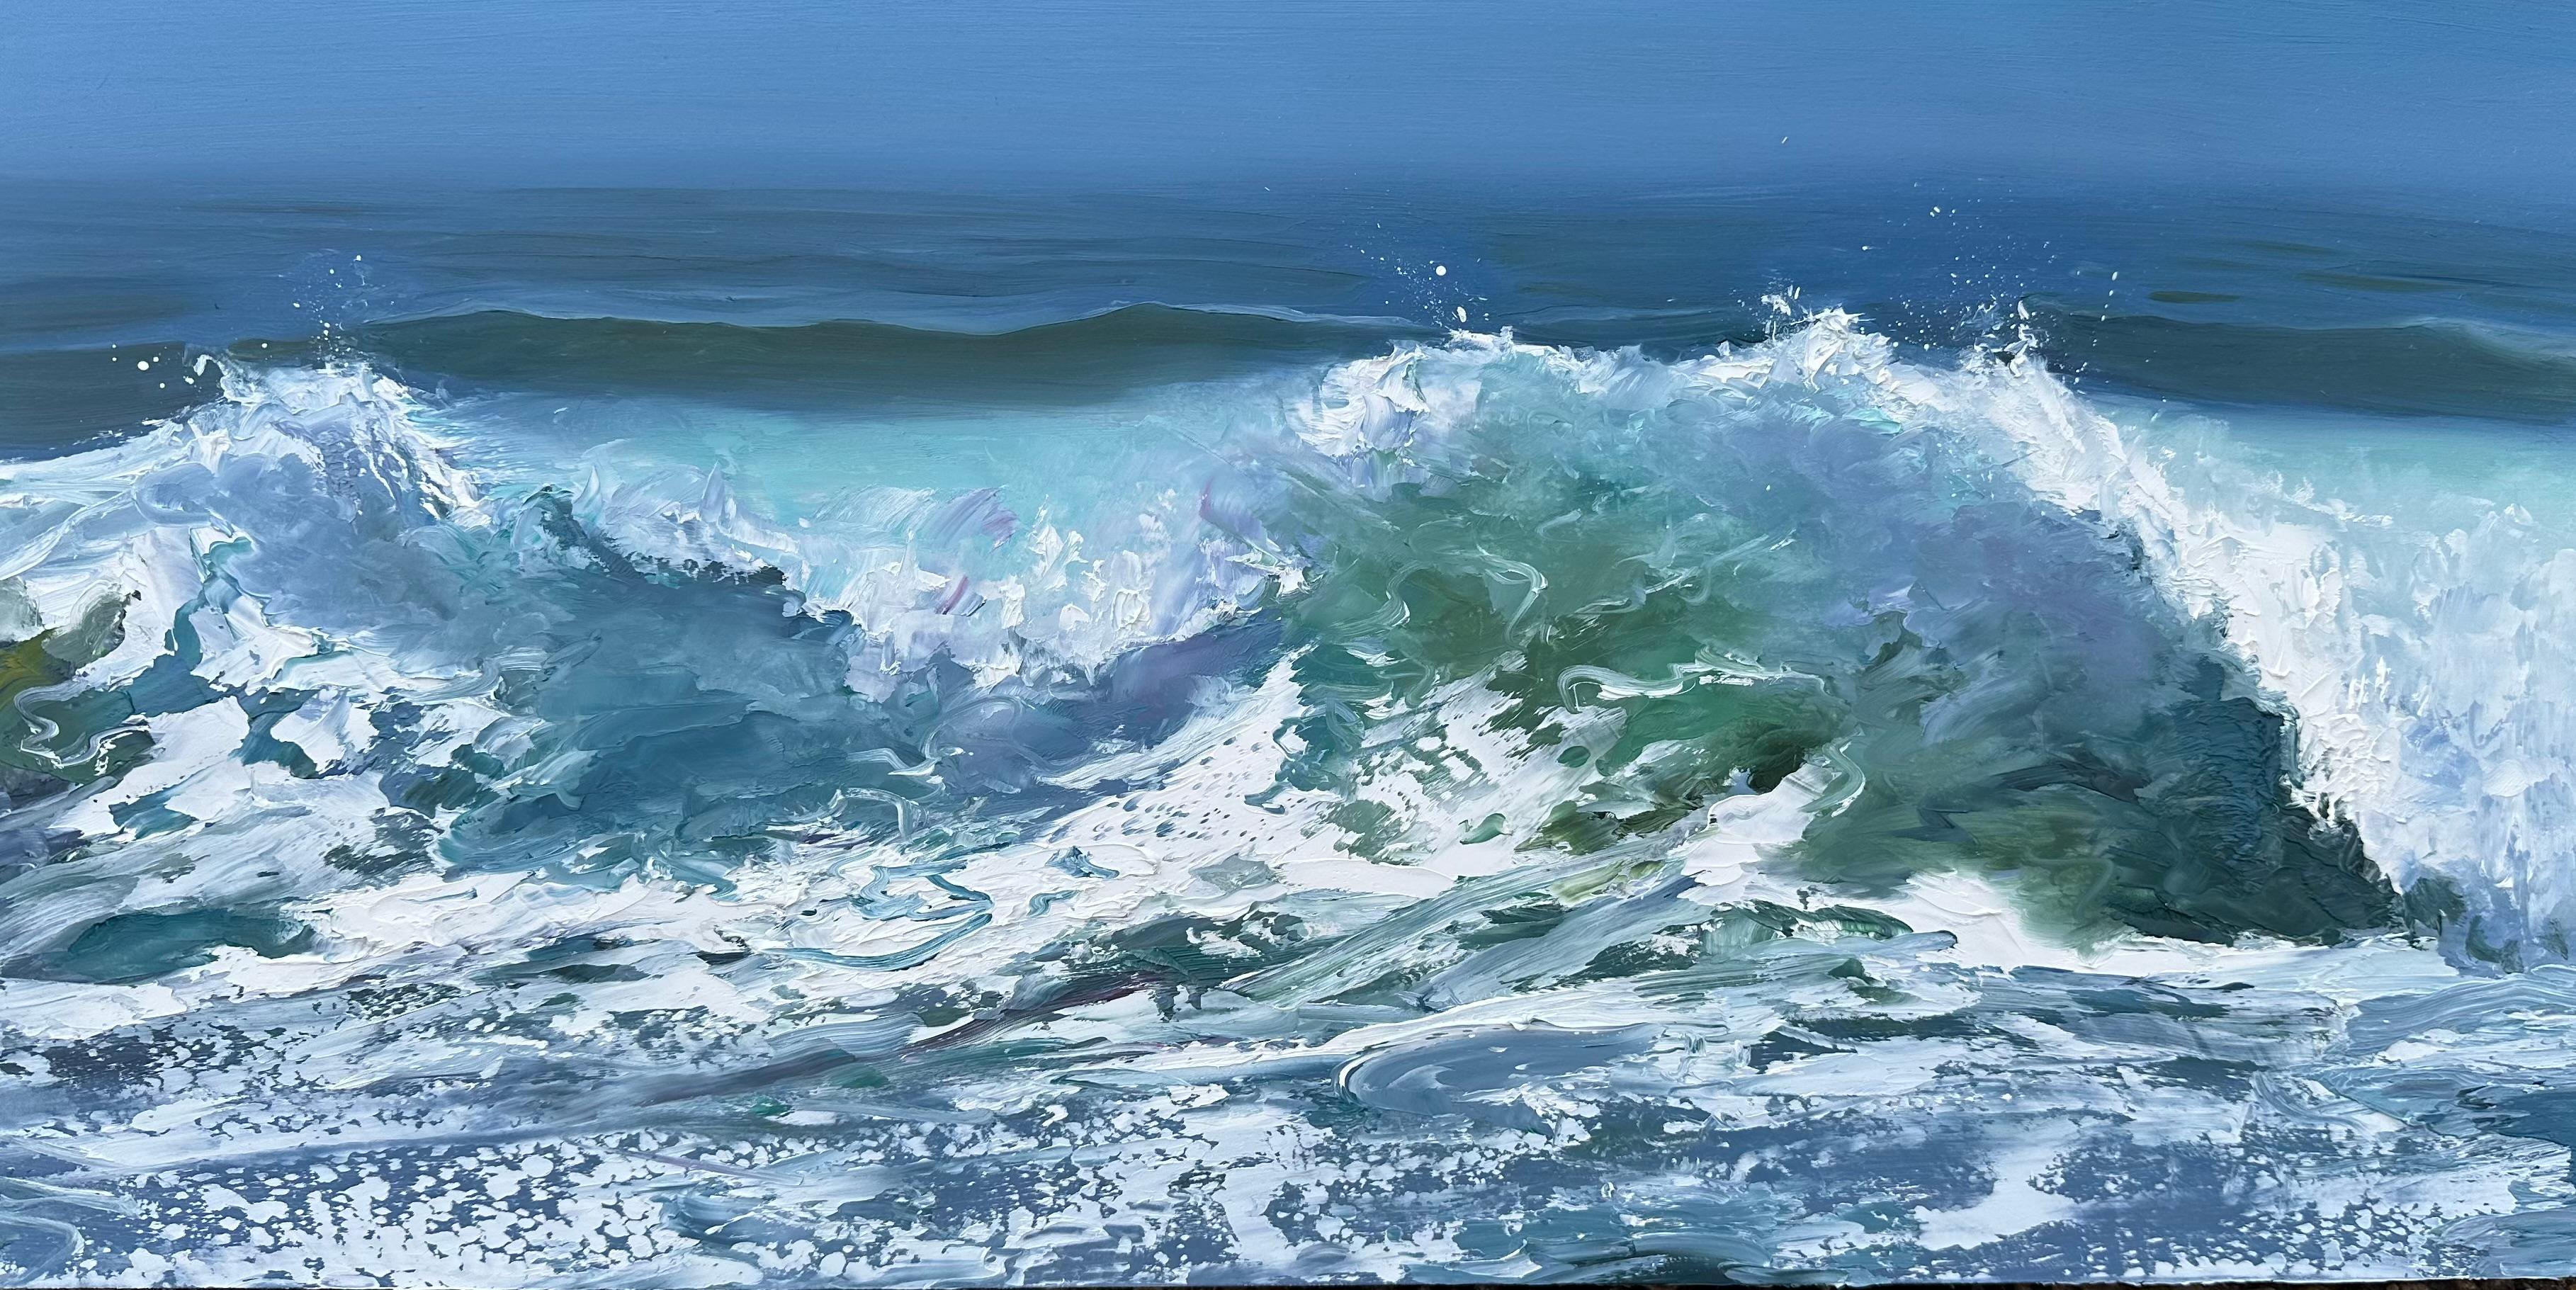 Whitney Knapp Landscape Painting - "Culmination", a landscape oil painting featuring crashing waves